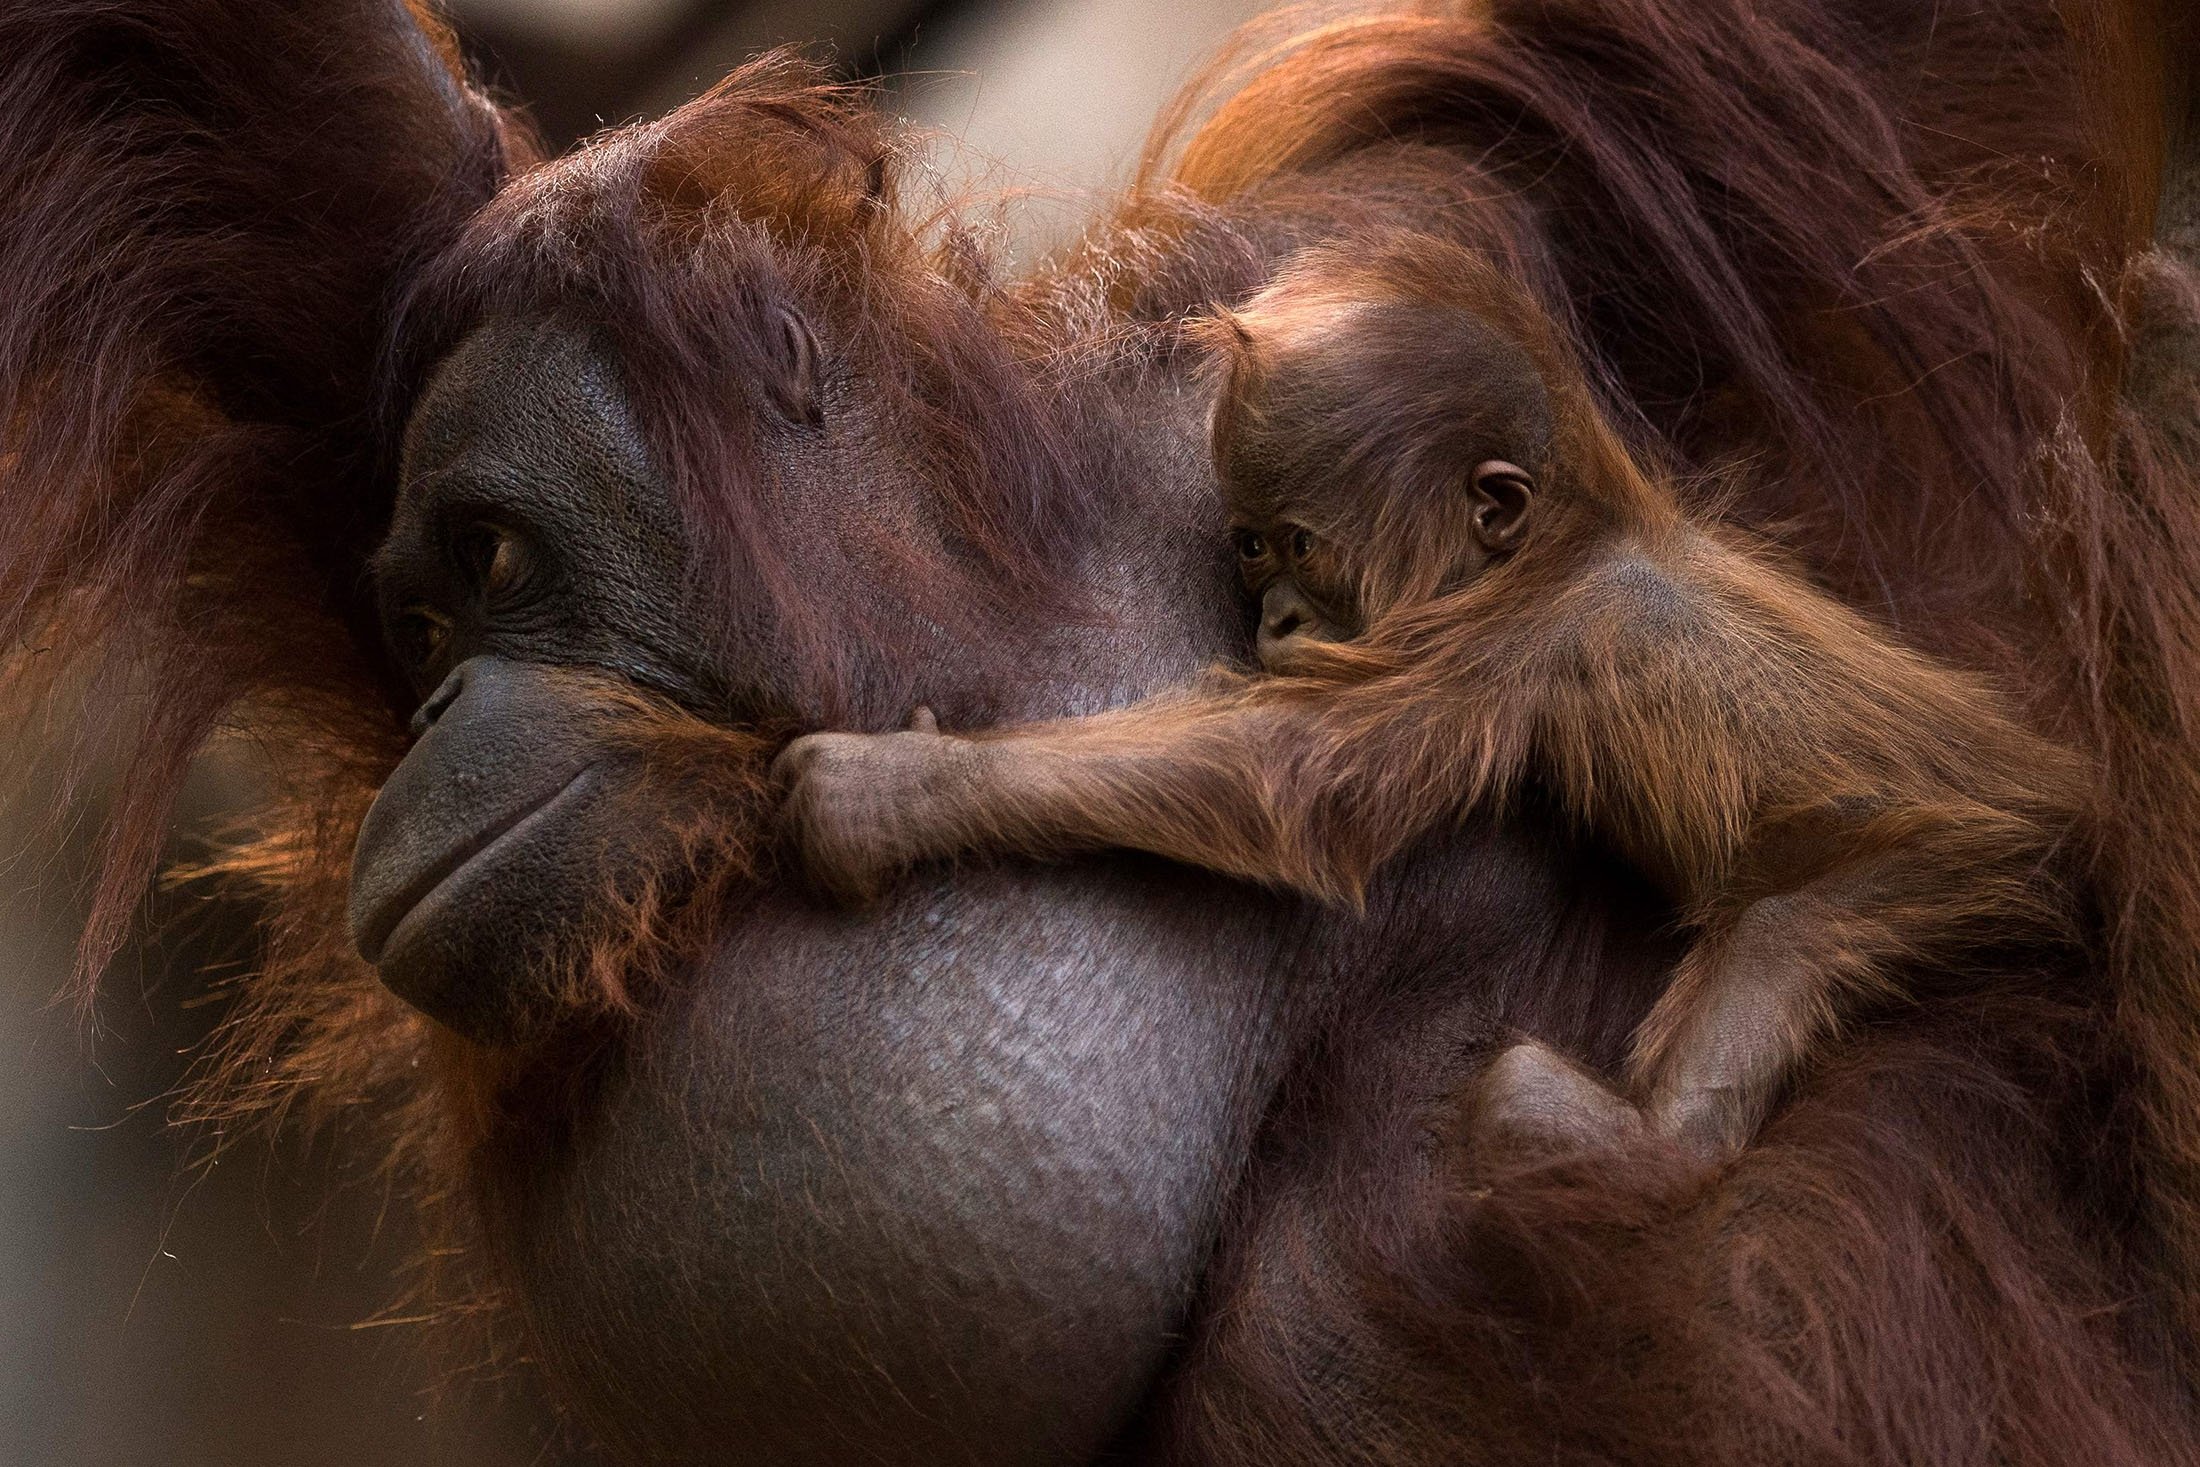 A Bornean orangutan called Suli holds her newborn baby at their enclosure at the Bioparc zoological park in Fuengirola, Spain, Aug. 12, 2021. (AFP Photo)